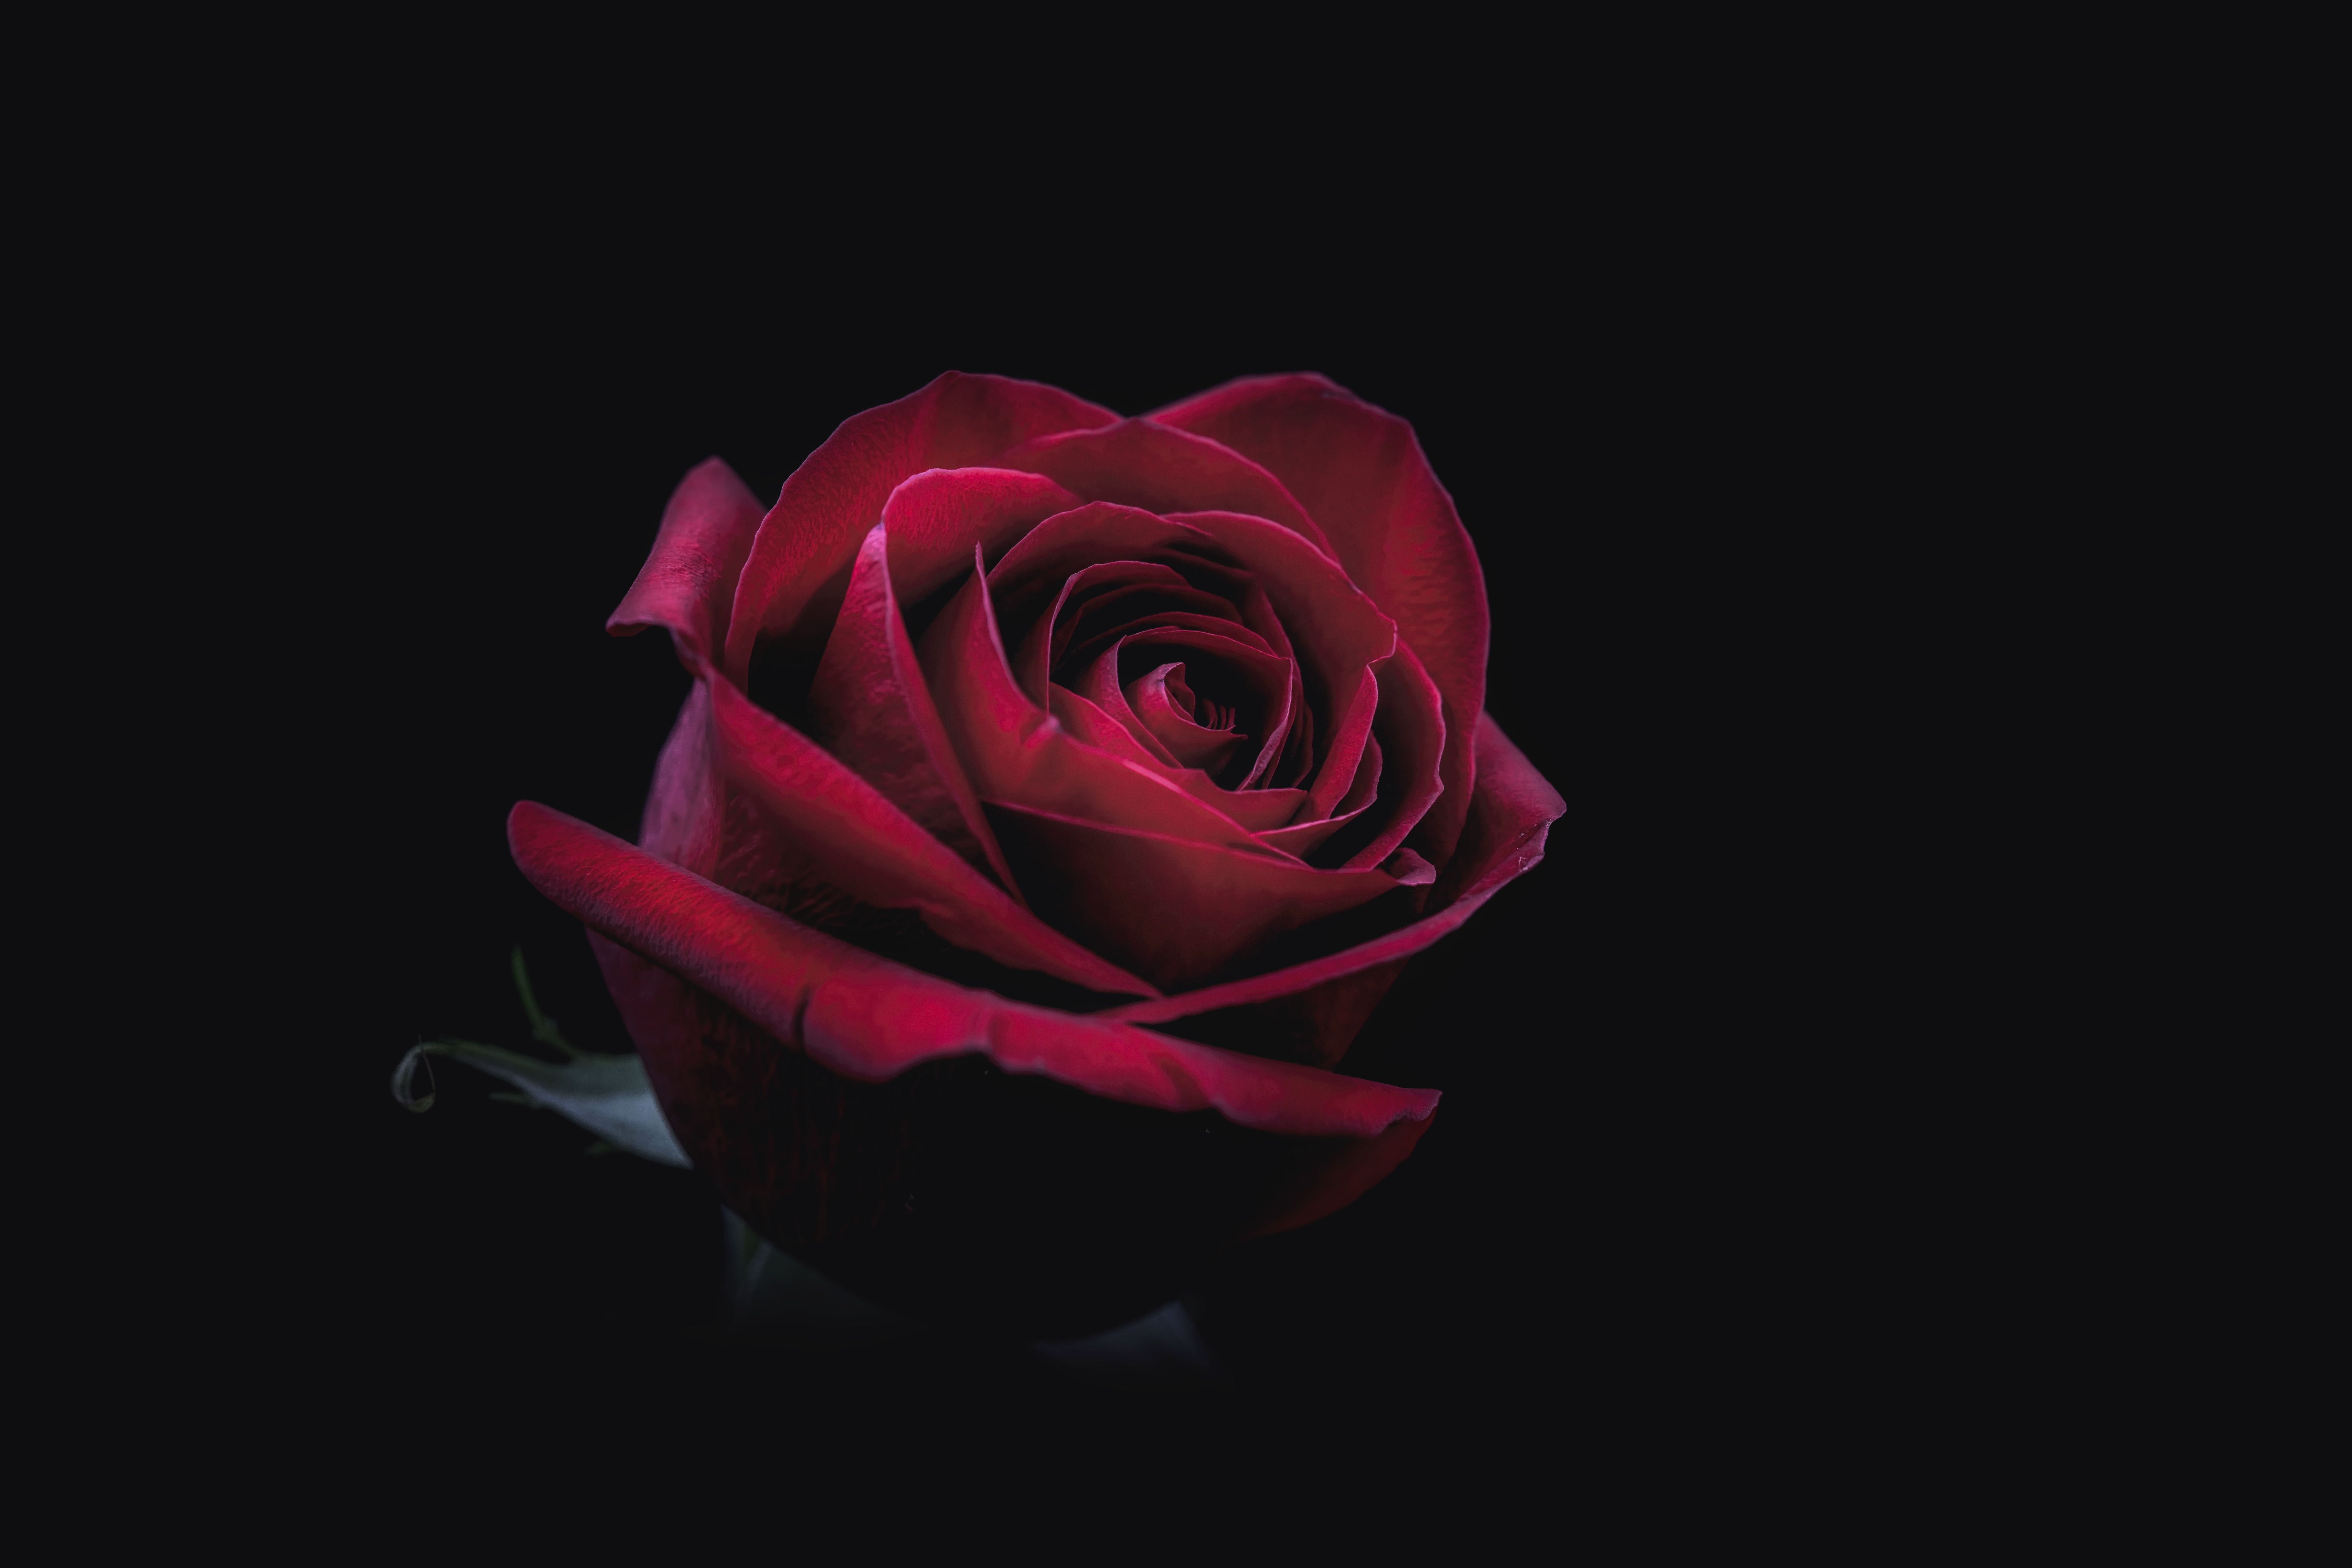 Rose Oled 8k 8k HD 4k Wallpaper, Image, Background, Photo and Picture